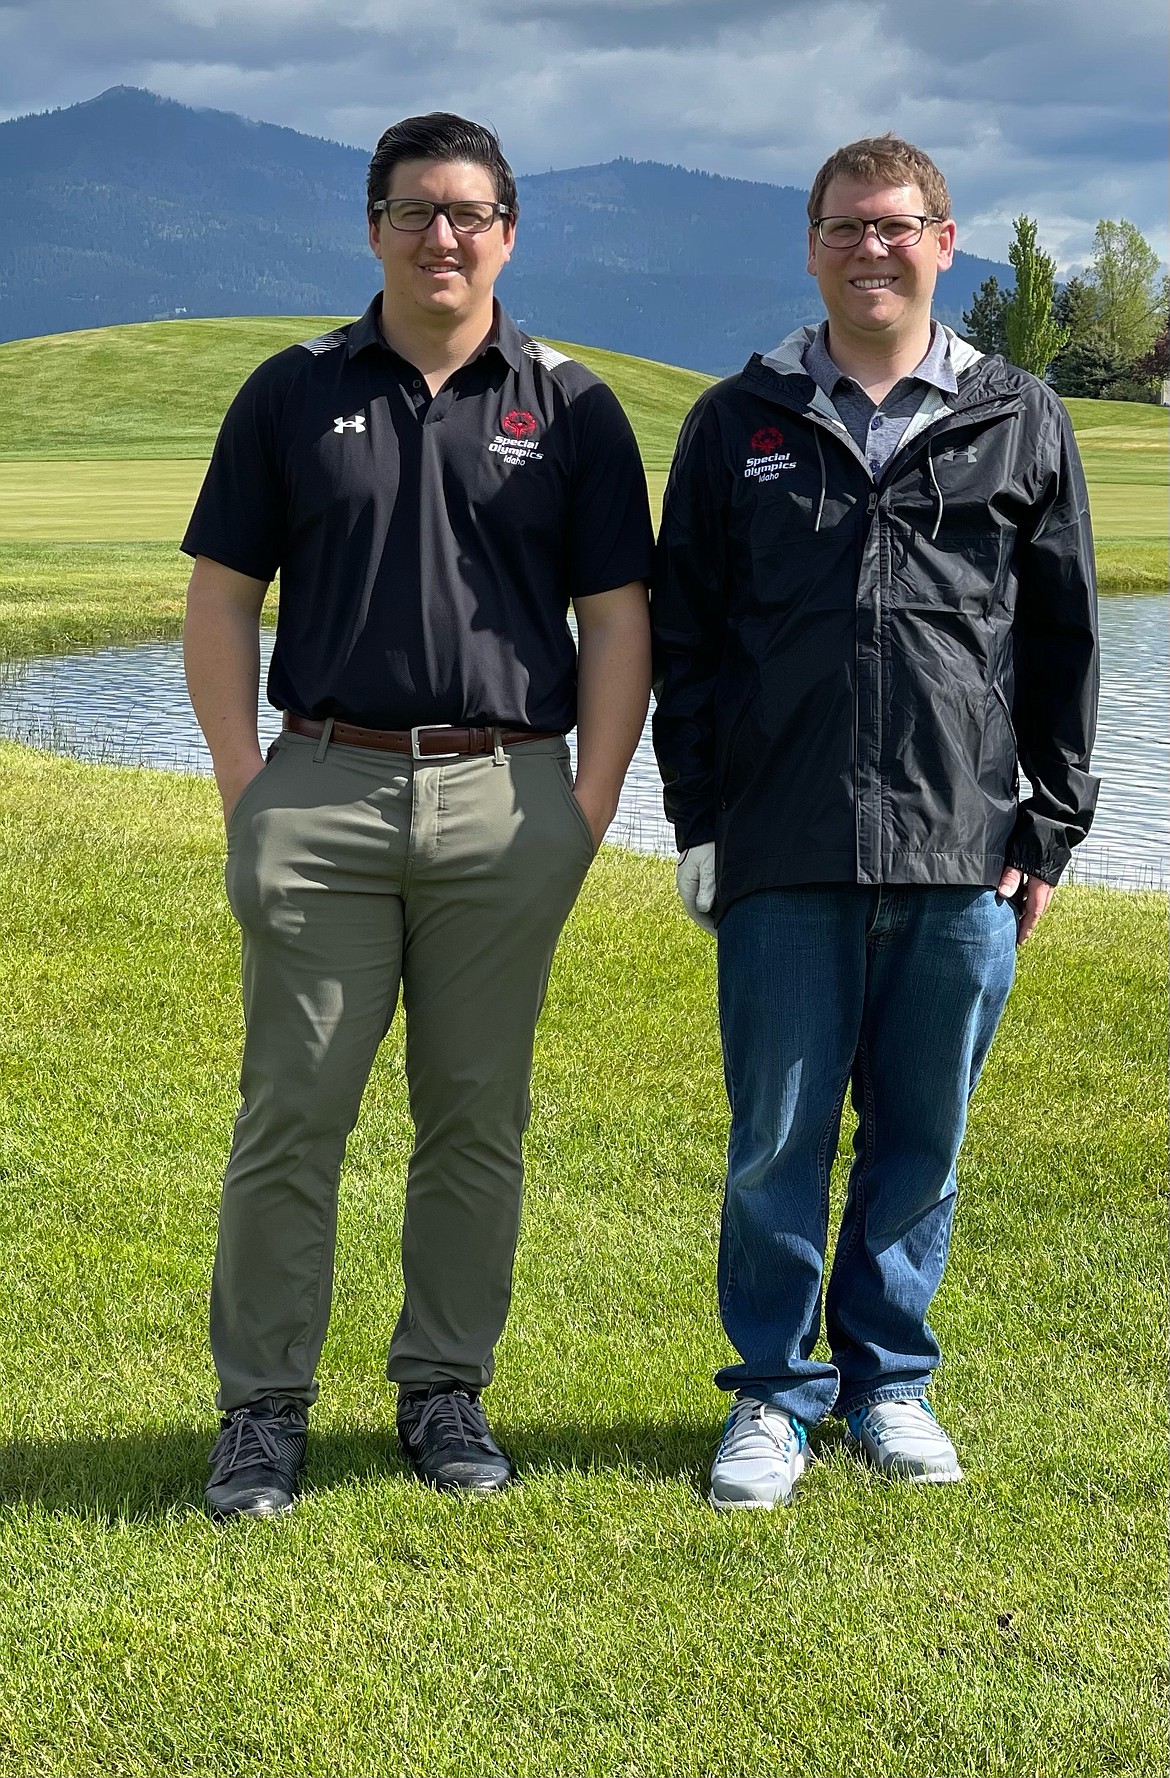 Special Olympics Idaho Athlete Jason Kerr of Coeur d'Alene (right) and partner Matthew Creighton, of Post Falls, are traveling this week to Orlando, Fla., to compete in the Special Olympics USA Games.